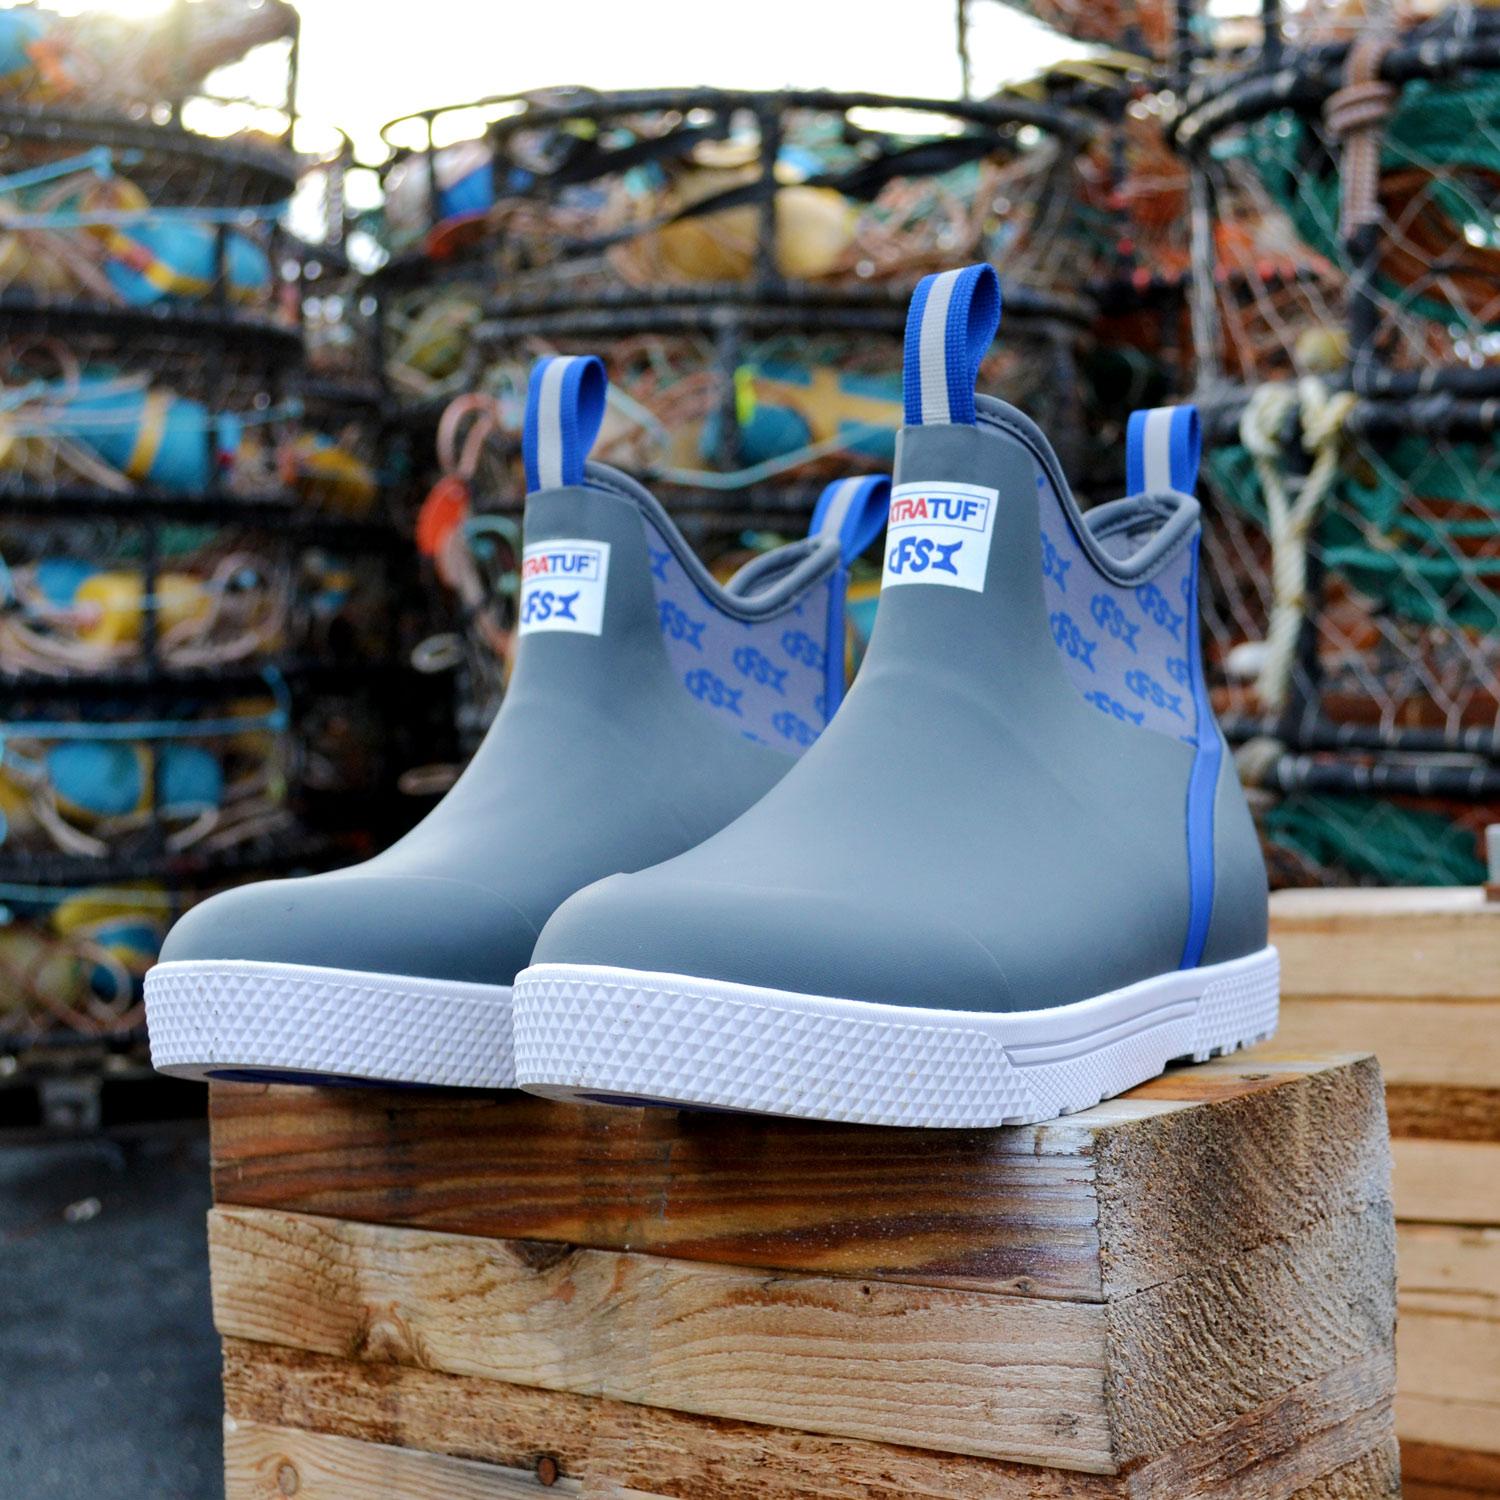 INTRODUCING: THE LIMITED EDITION LFS WHEELHOUSE BOOT BY XTRATUF